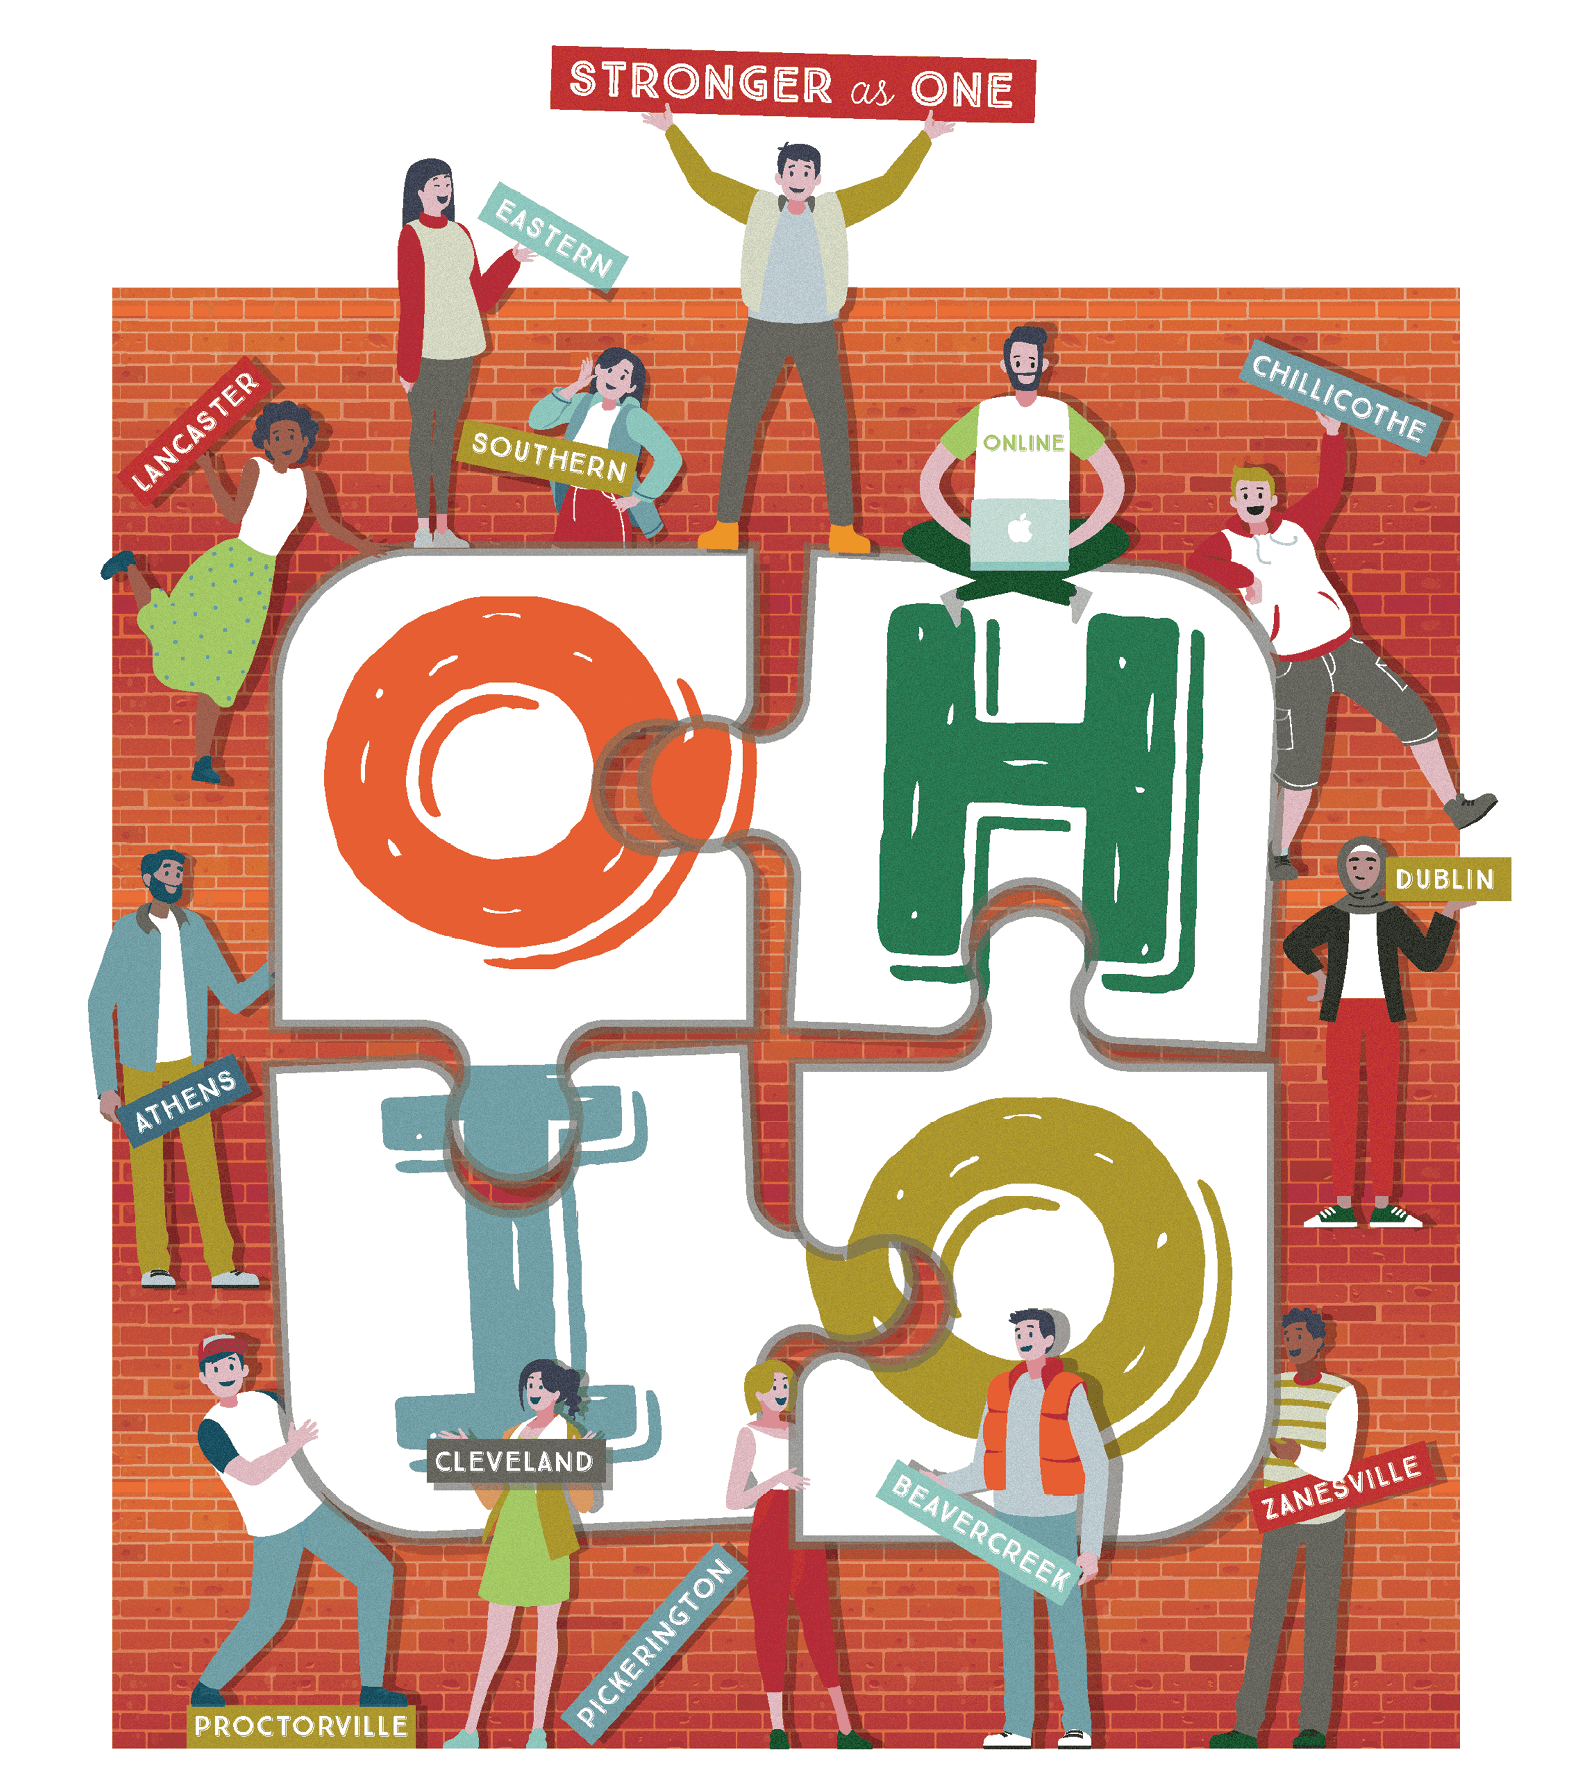 Illustration with different people holding up different OHIO campuses. In the center O H I O is connected like a puzzle. Titled stronger as one